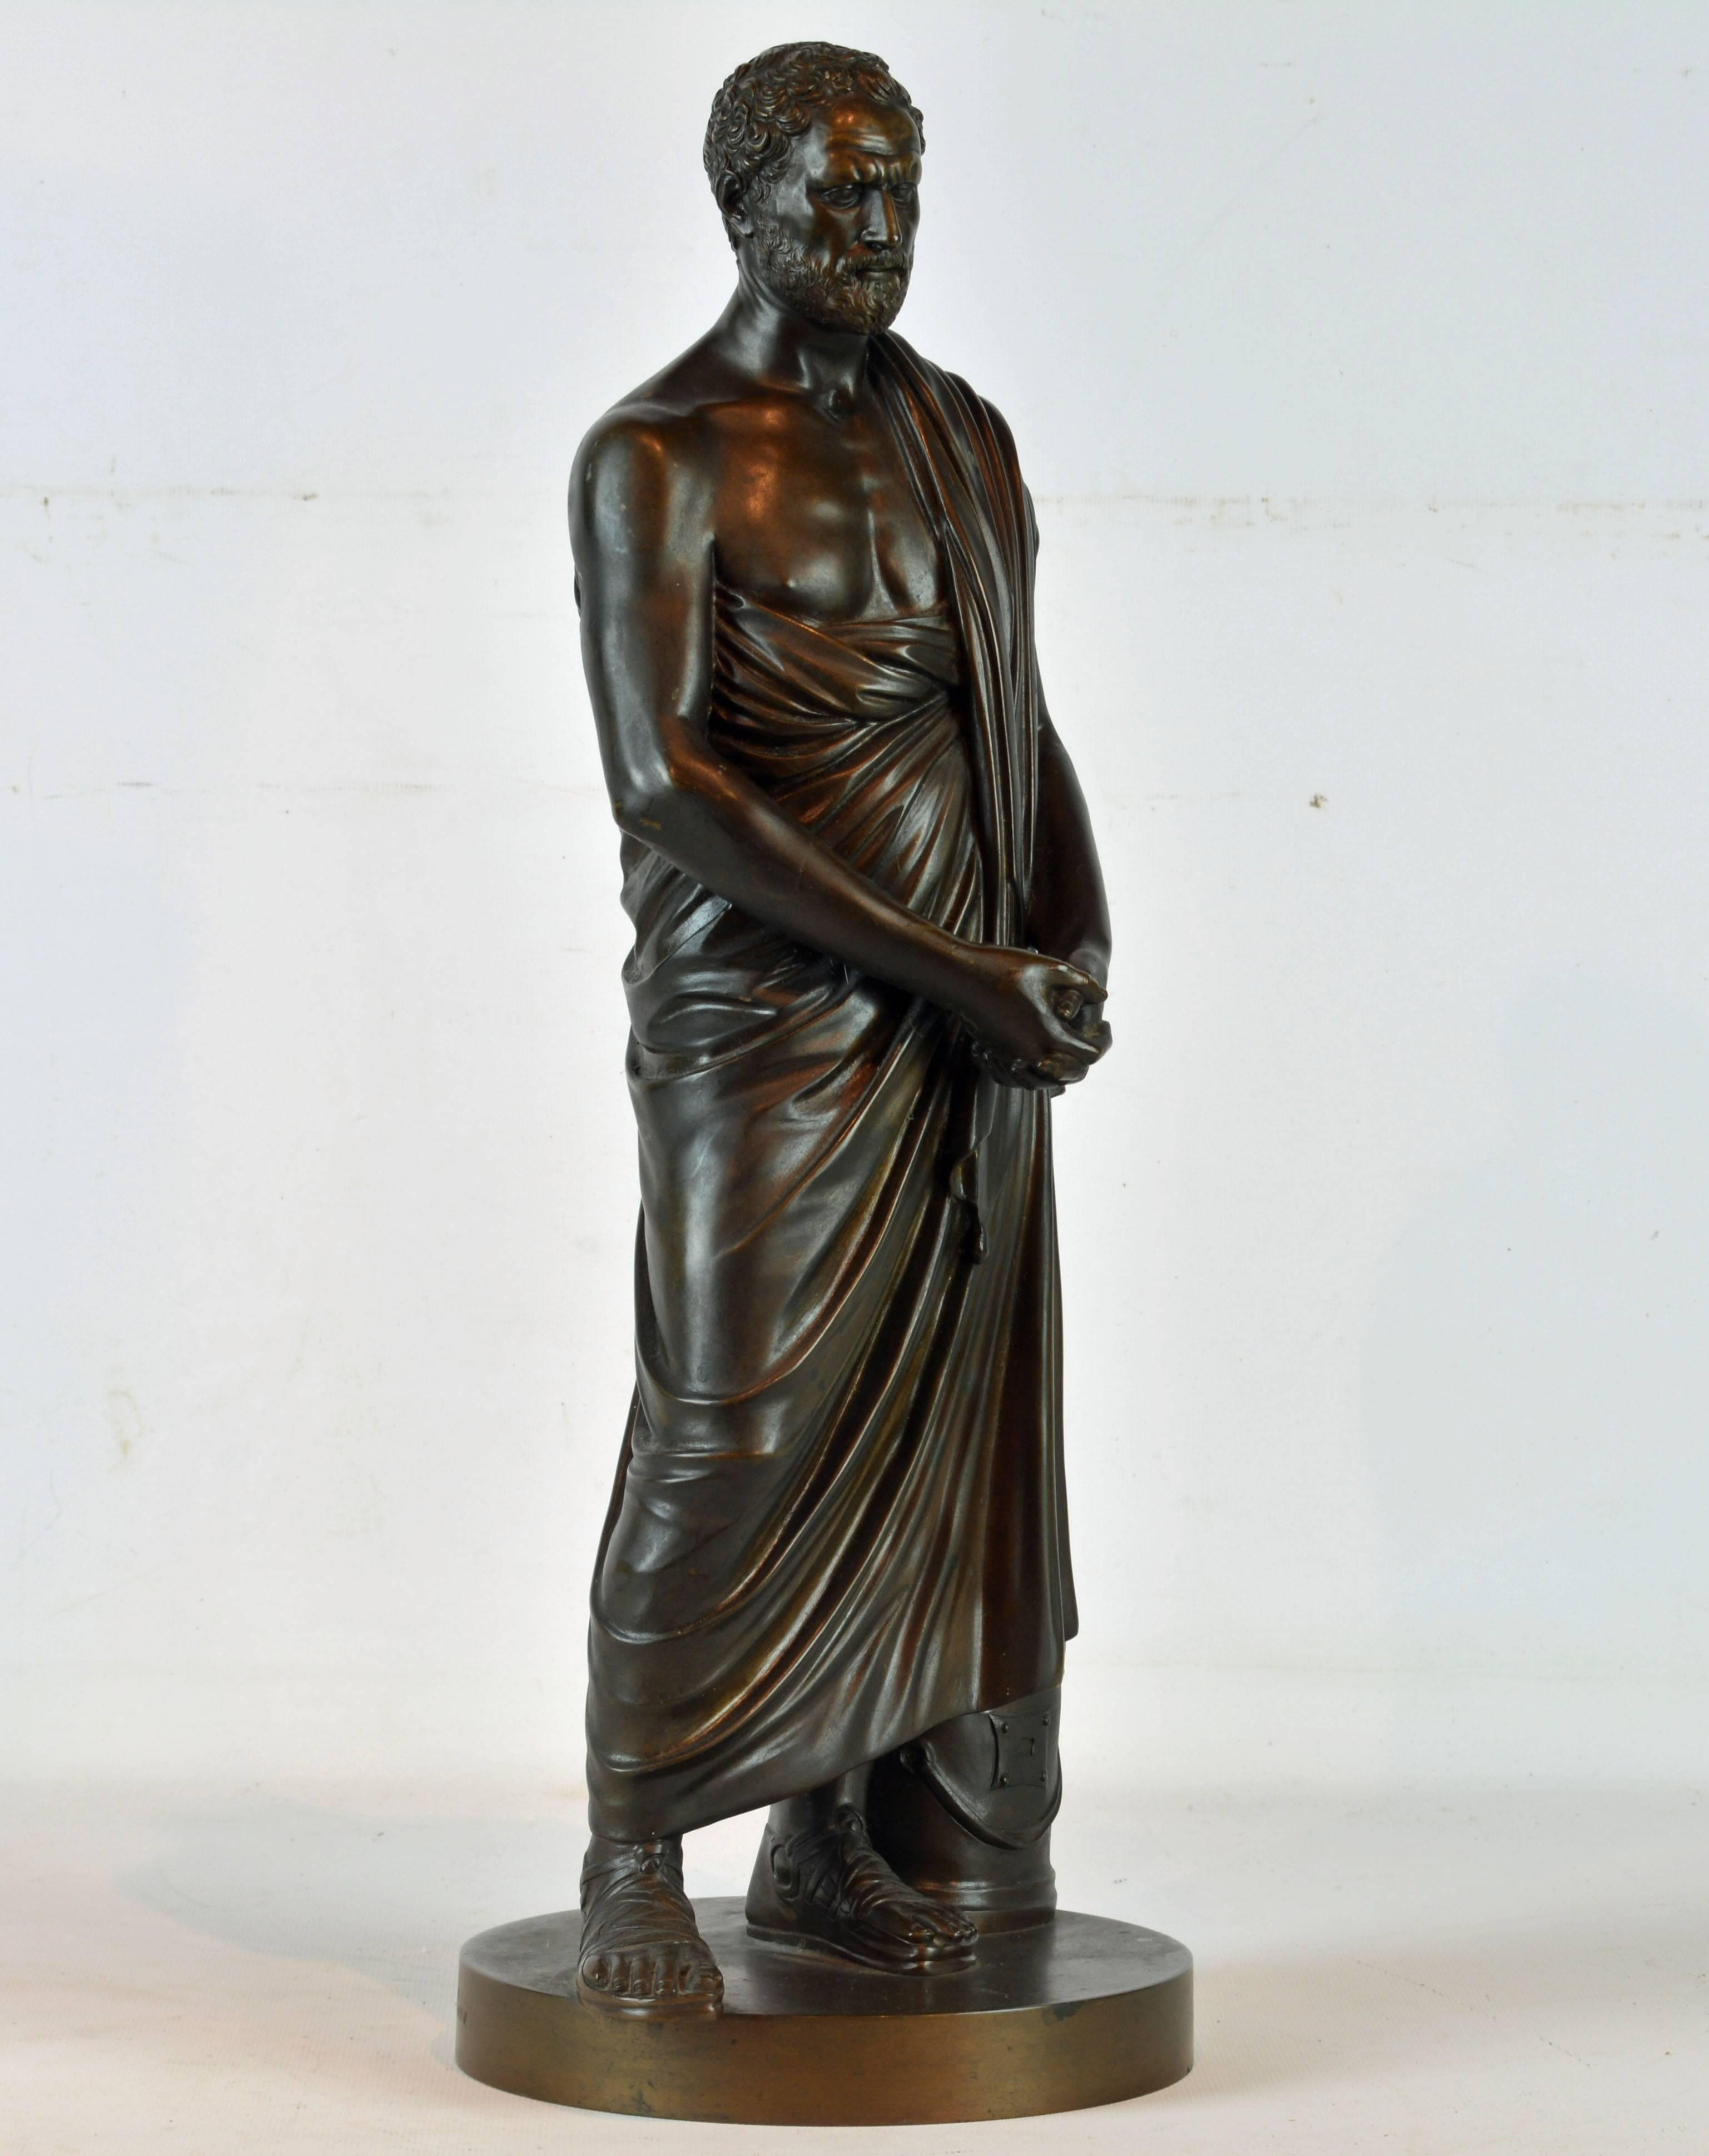 Excellently modeled and cast this classical patinated bronze sculpture of the legendary Greek statesman and orator Demosthenes (384-322 BC) stands almost 19 inches tall radiating all the intellectual virtues of the antiquity. Demosthenes lived in